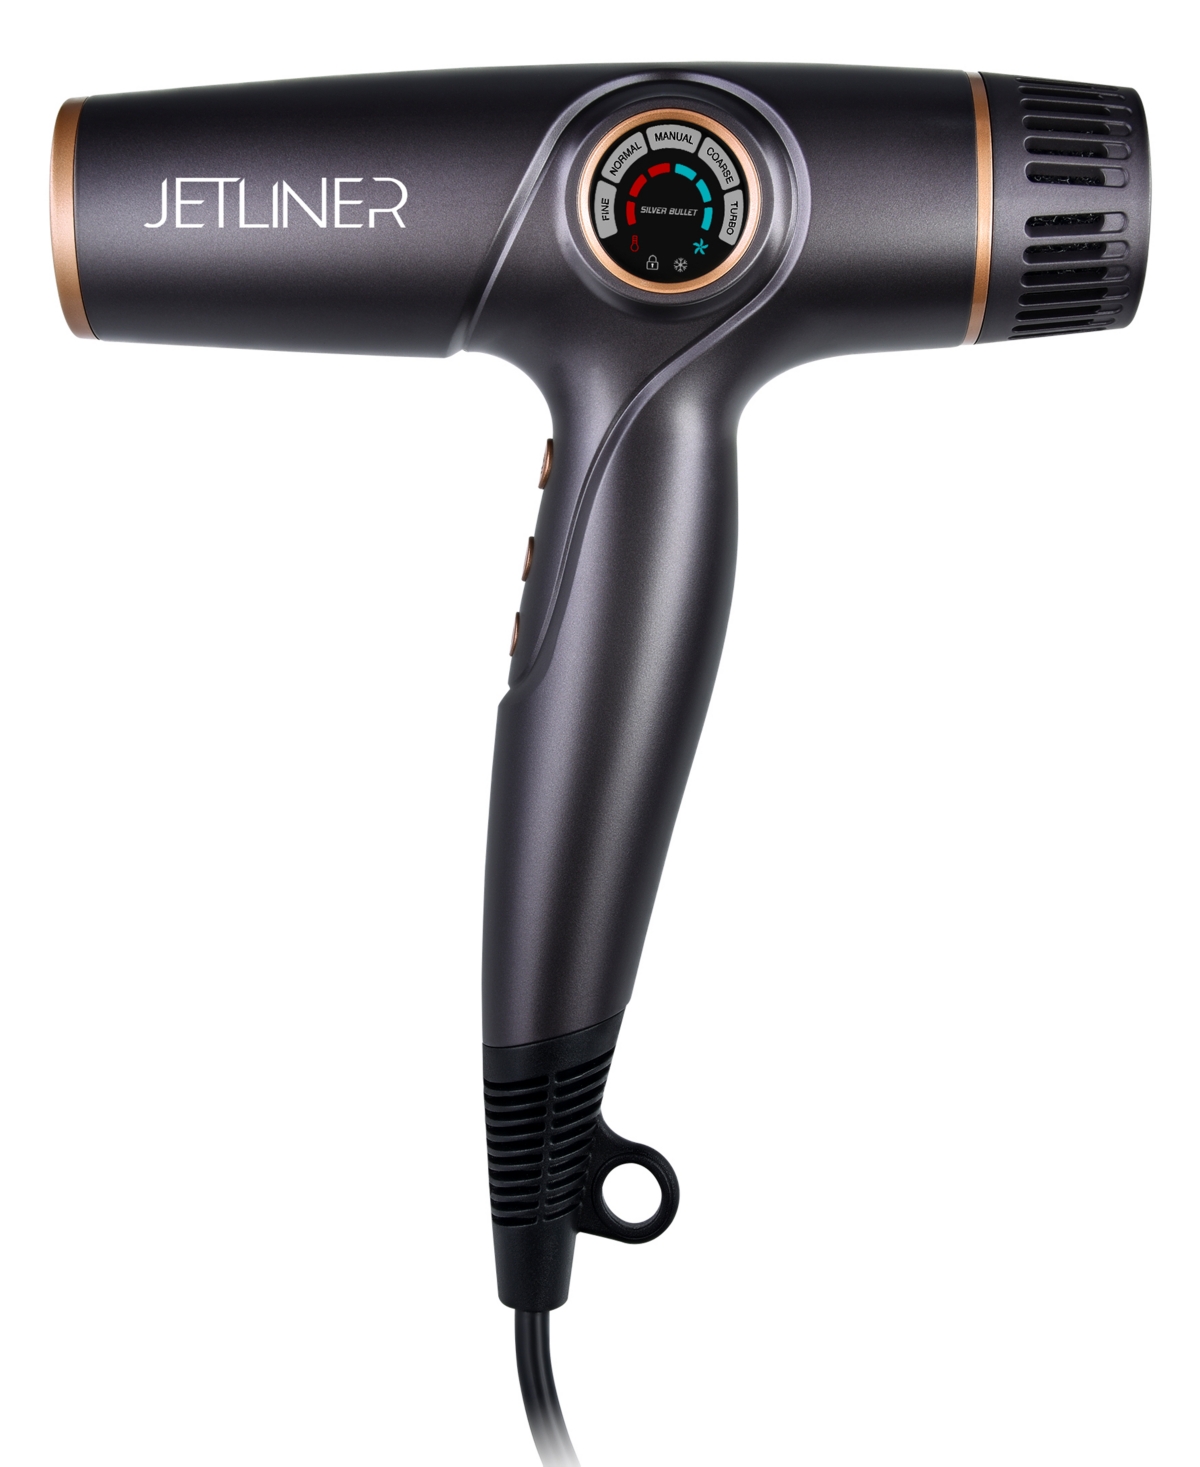 Stylecraft Professional Silver Bullet Jetliner Professional Lightweight Hair Dryer In No Color